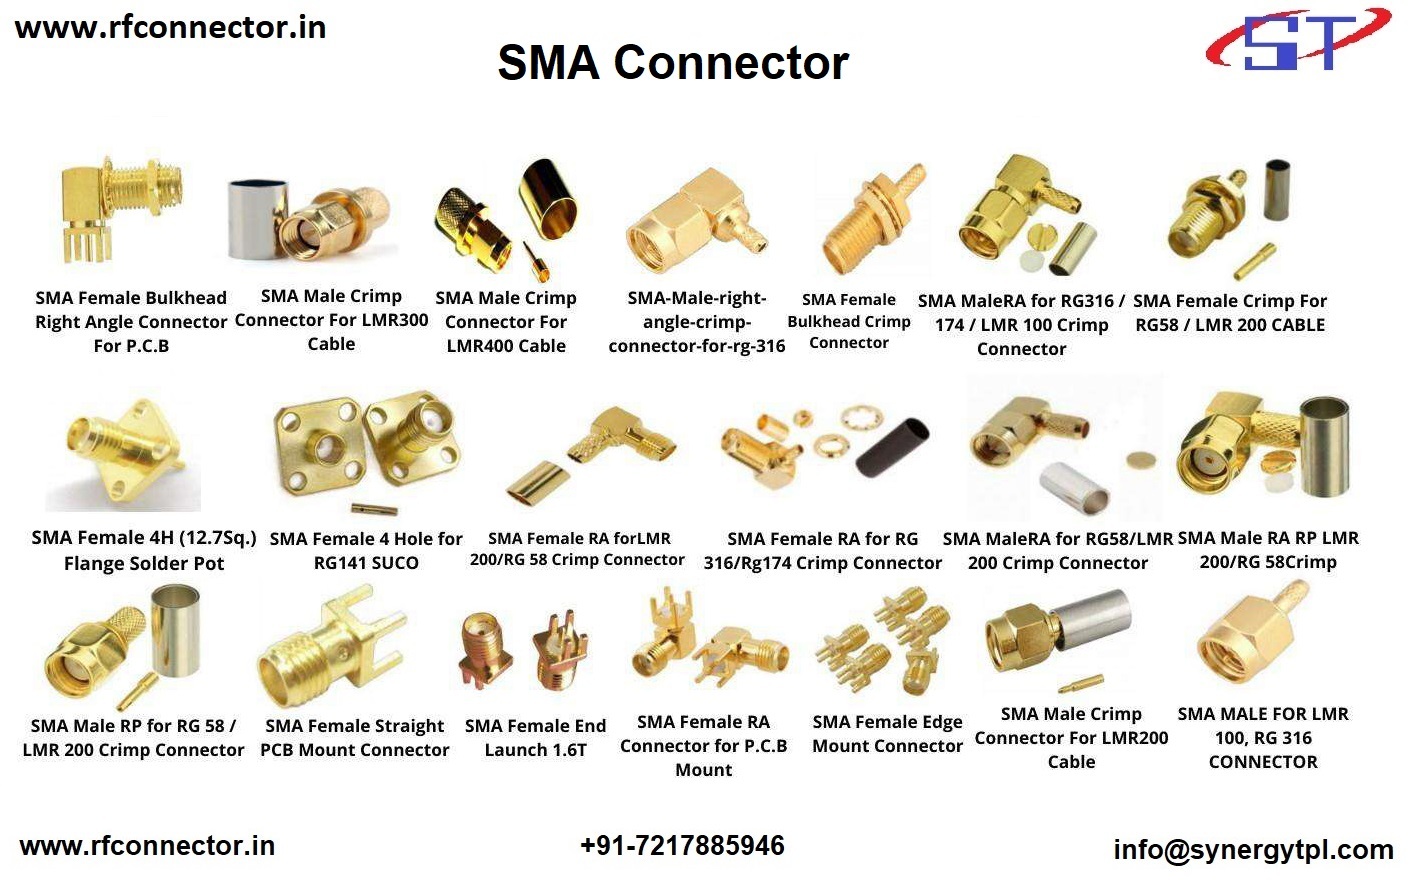 SMA FEMALE FOR RG .86 SOLDER CONNECTOR